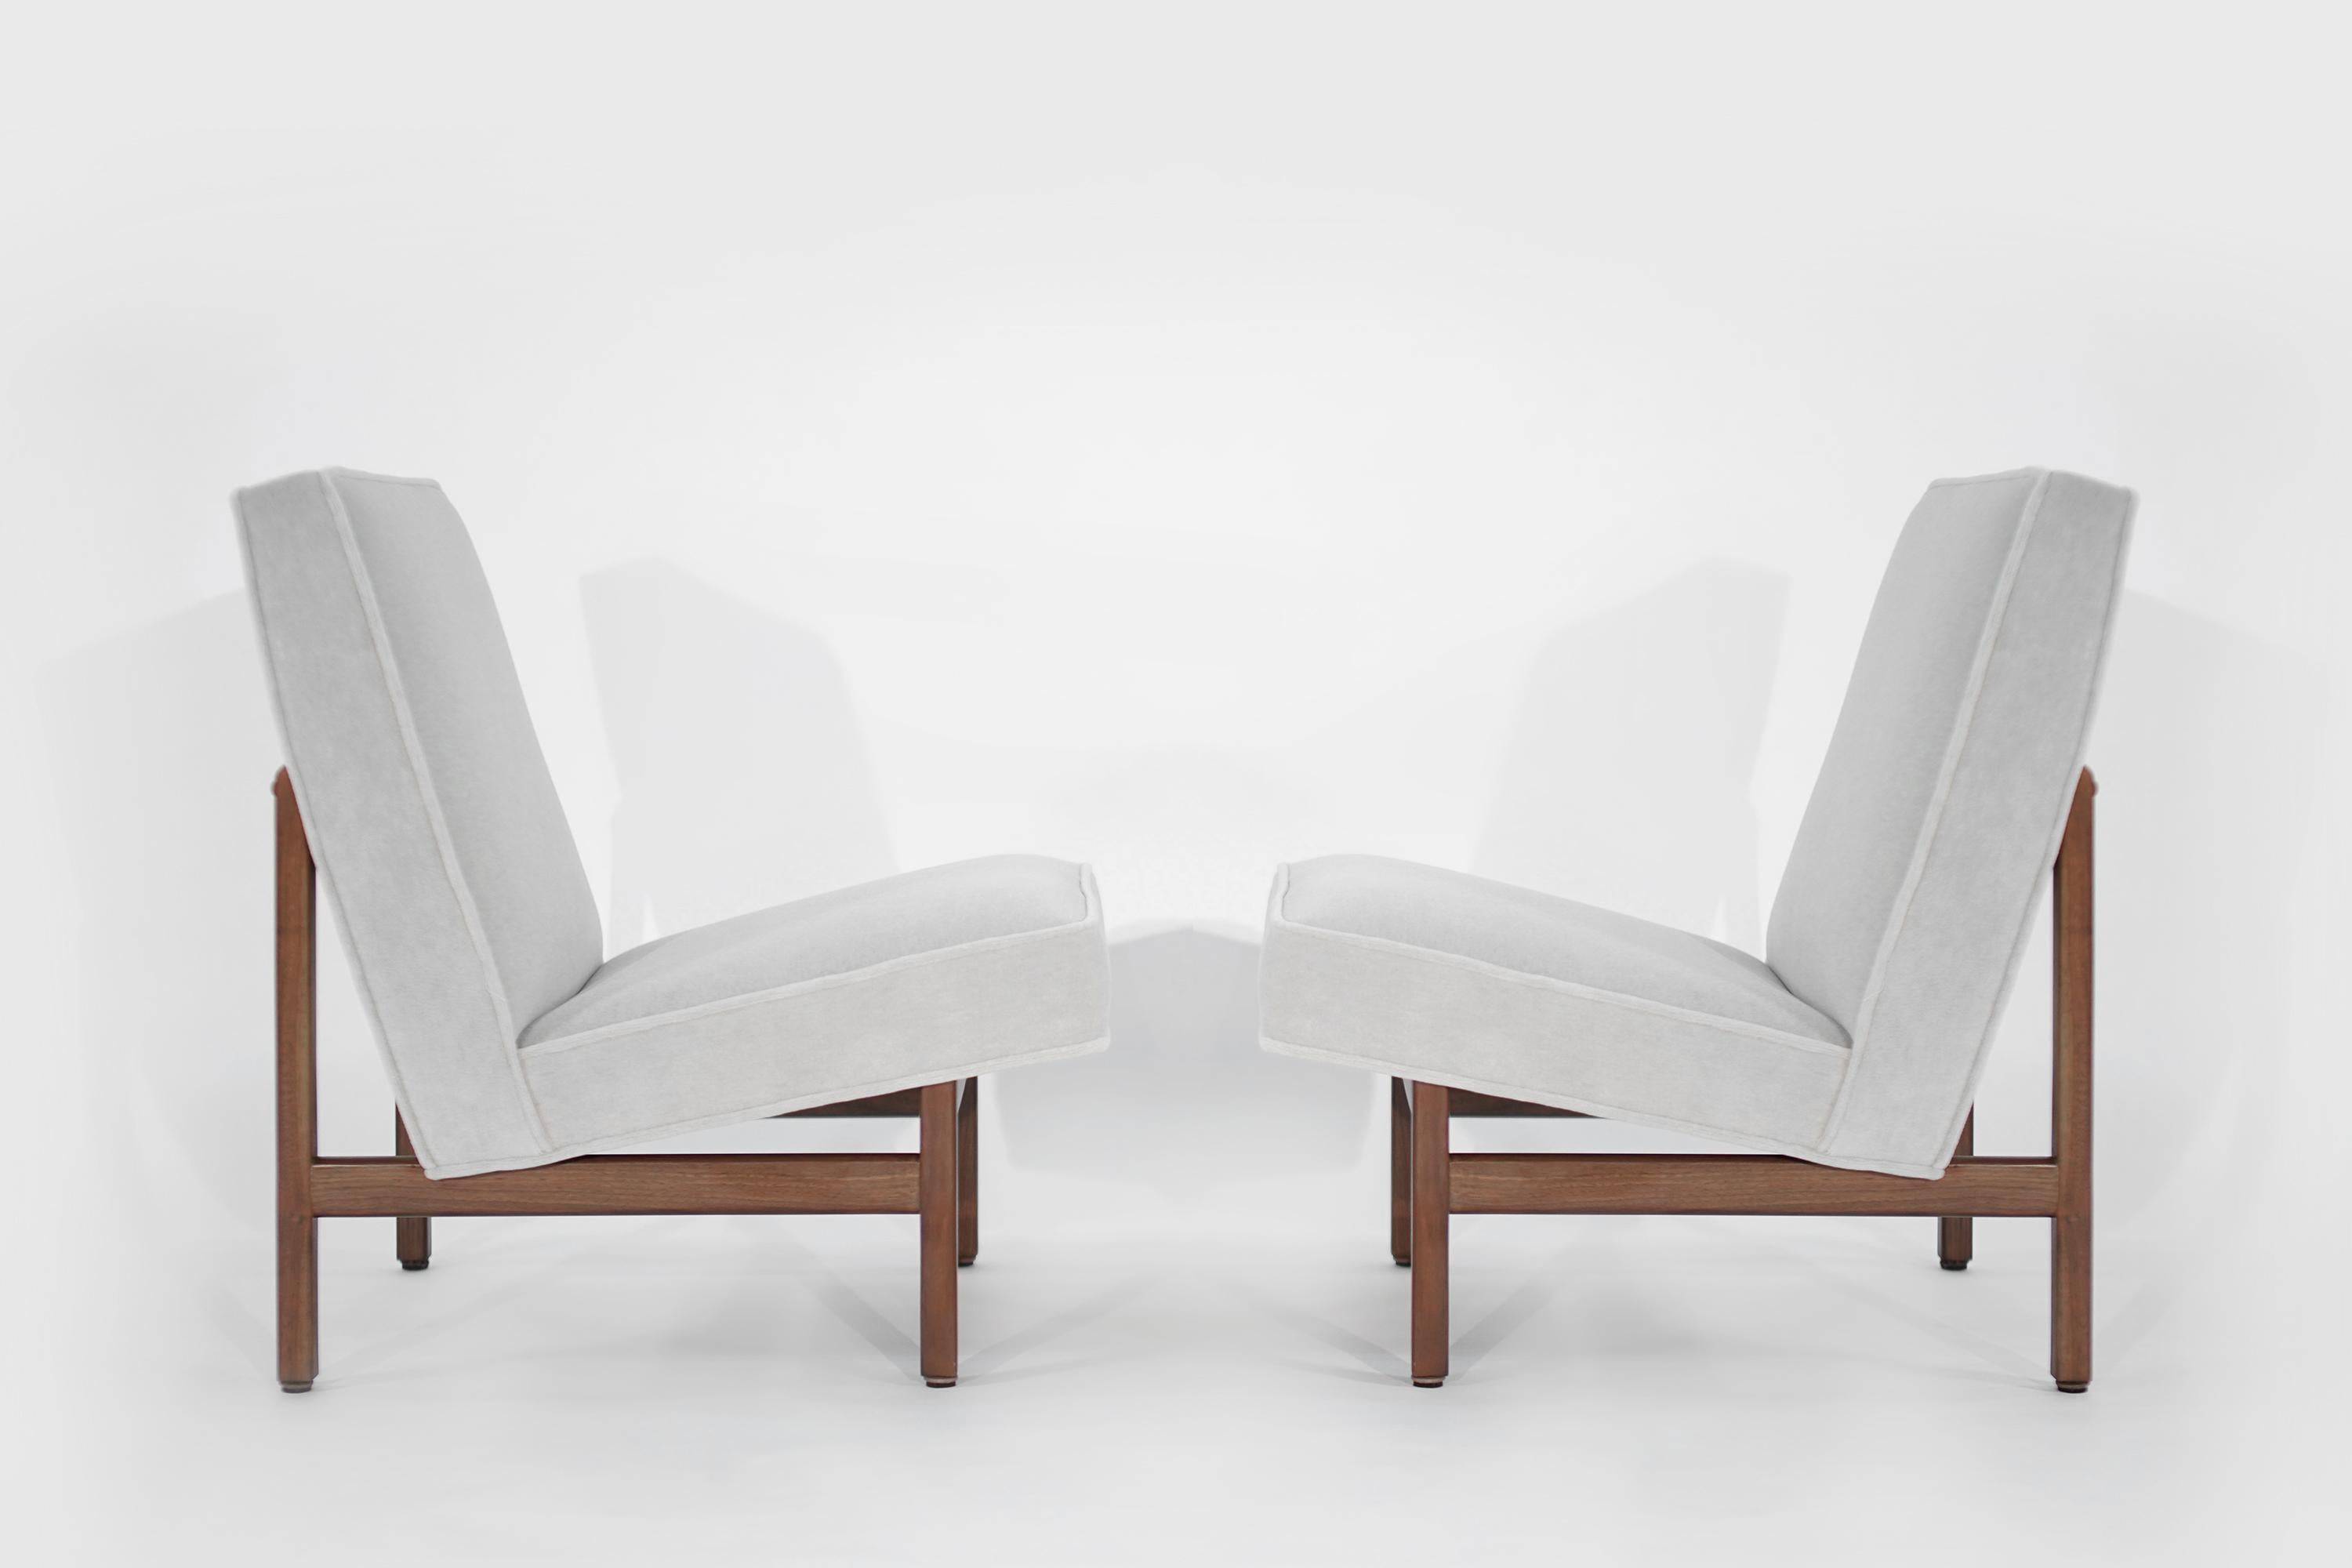 Rarely seen set of slipper chairs designed by Florence Knoll, newly upholstered in Great Plains alpaca velvet by Holly Hunt. Walnut frames fully restored.